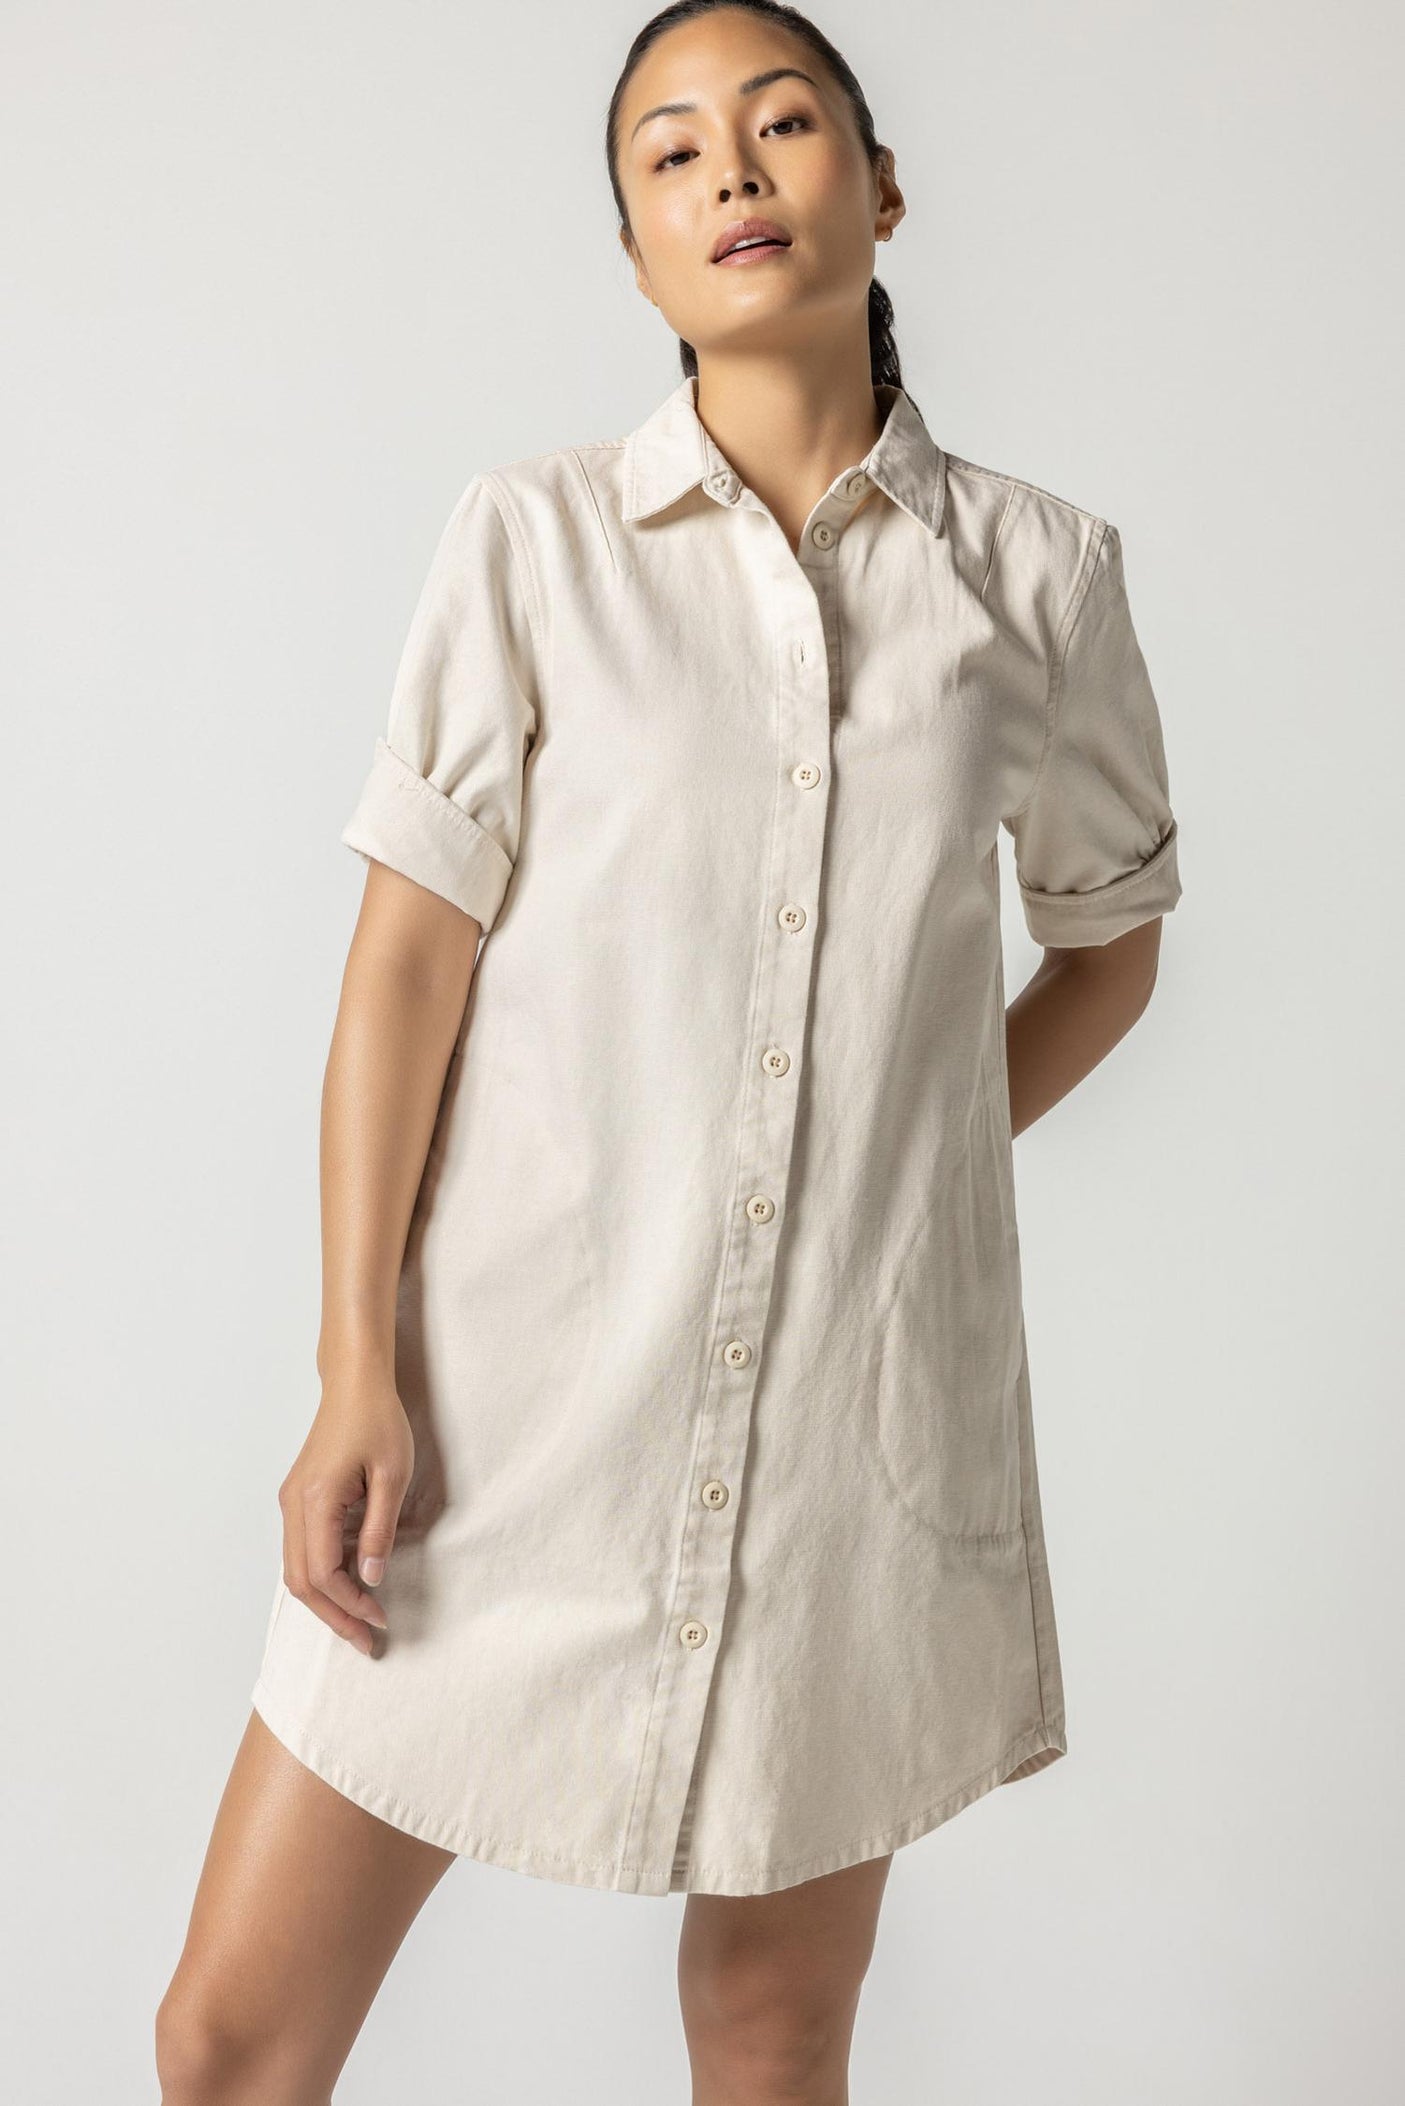 Comfy White Striped T-shirt Dress - Casual House Dresses for Women – Shop  the Mint